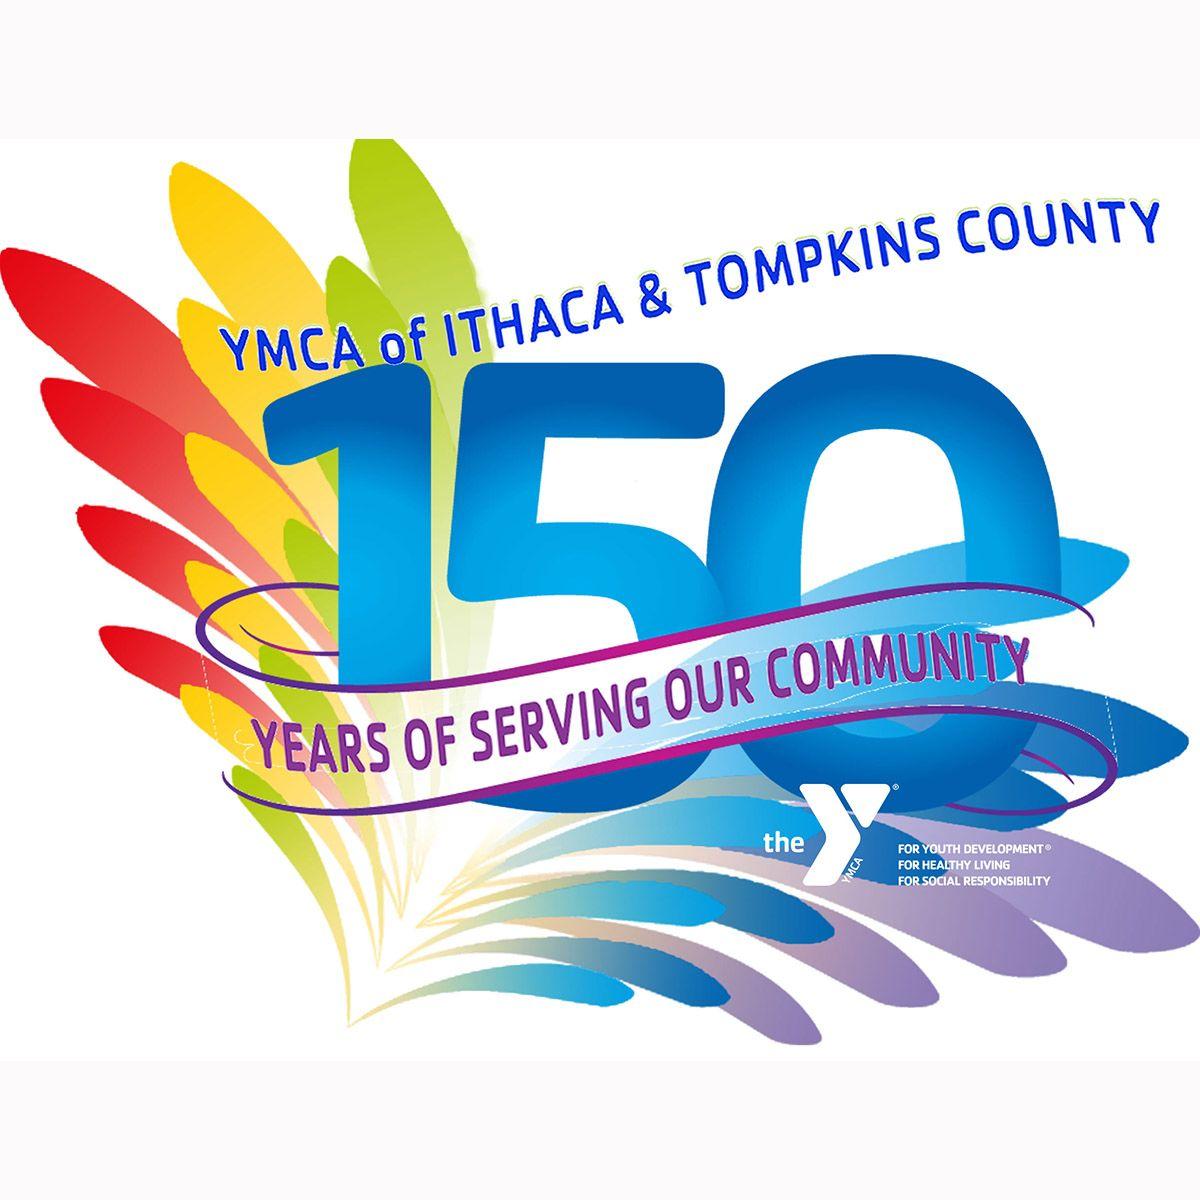 Ithaca Logo - The YMCA Youth Development, For Healthy Living, For Social